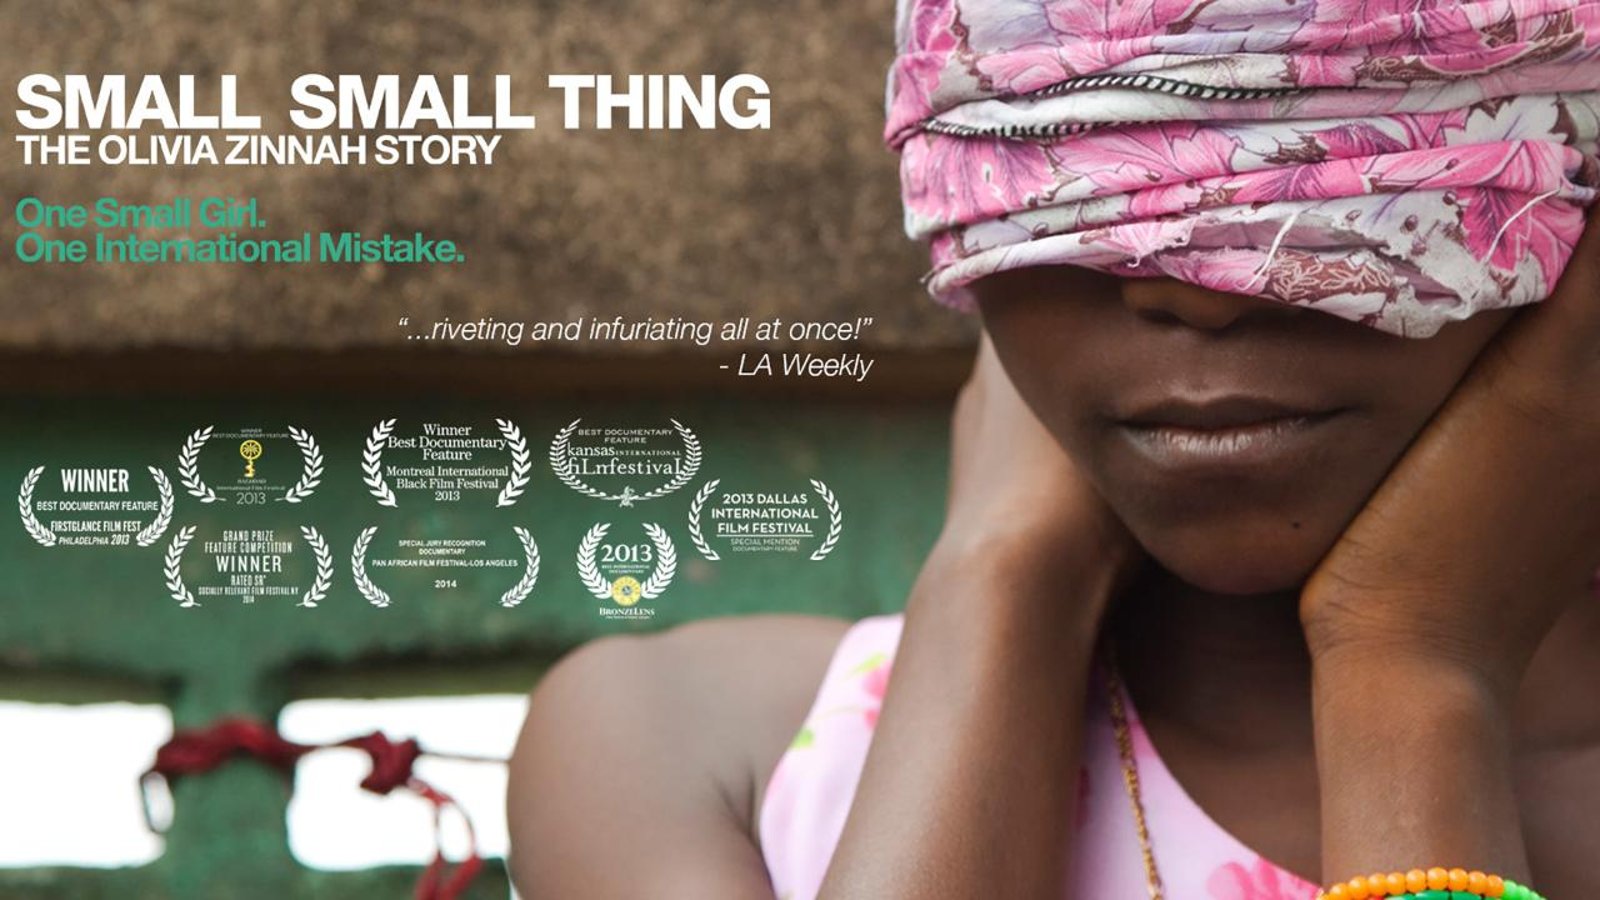 Small Small Thing: The Olivia Zinnah Story - Fighting for Justice for a Young Rape Victim in Africa